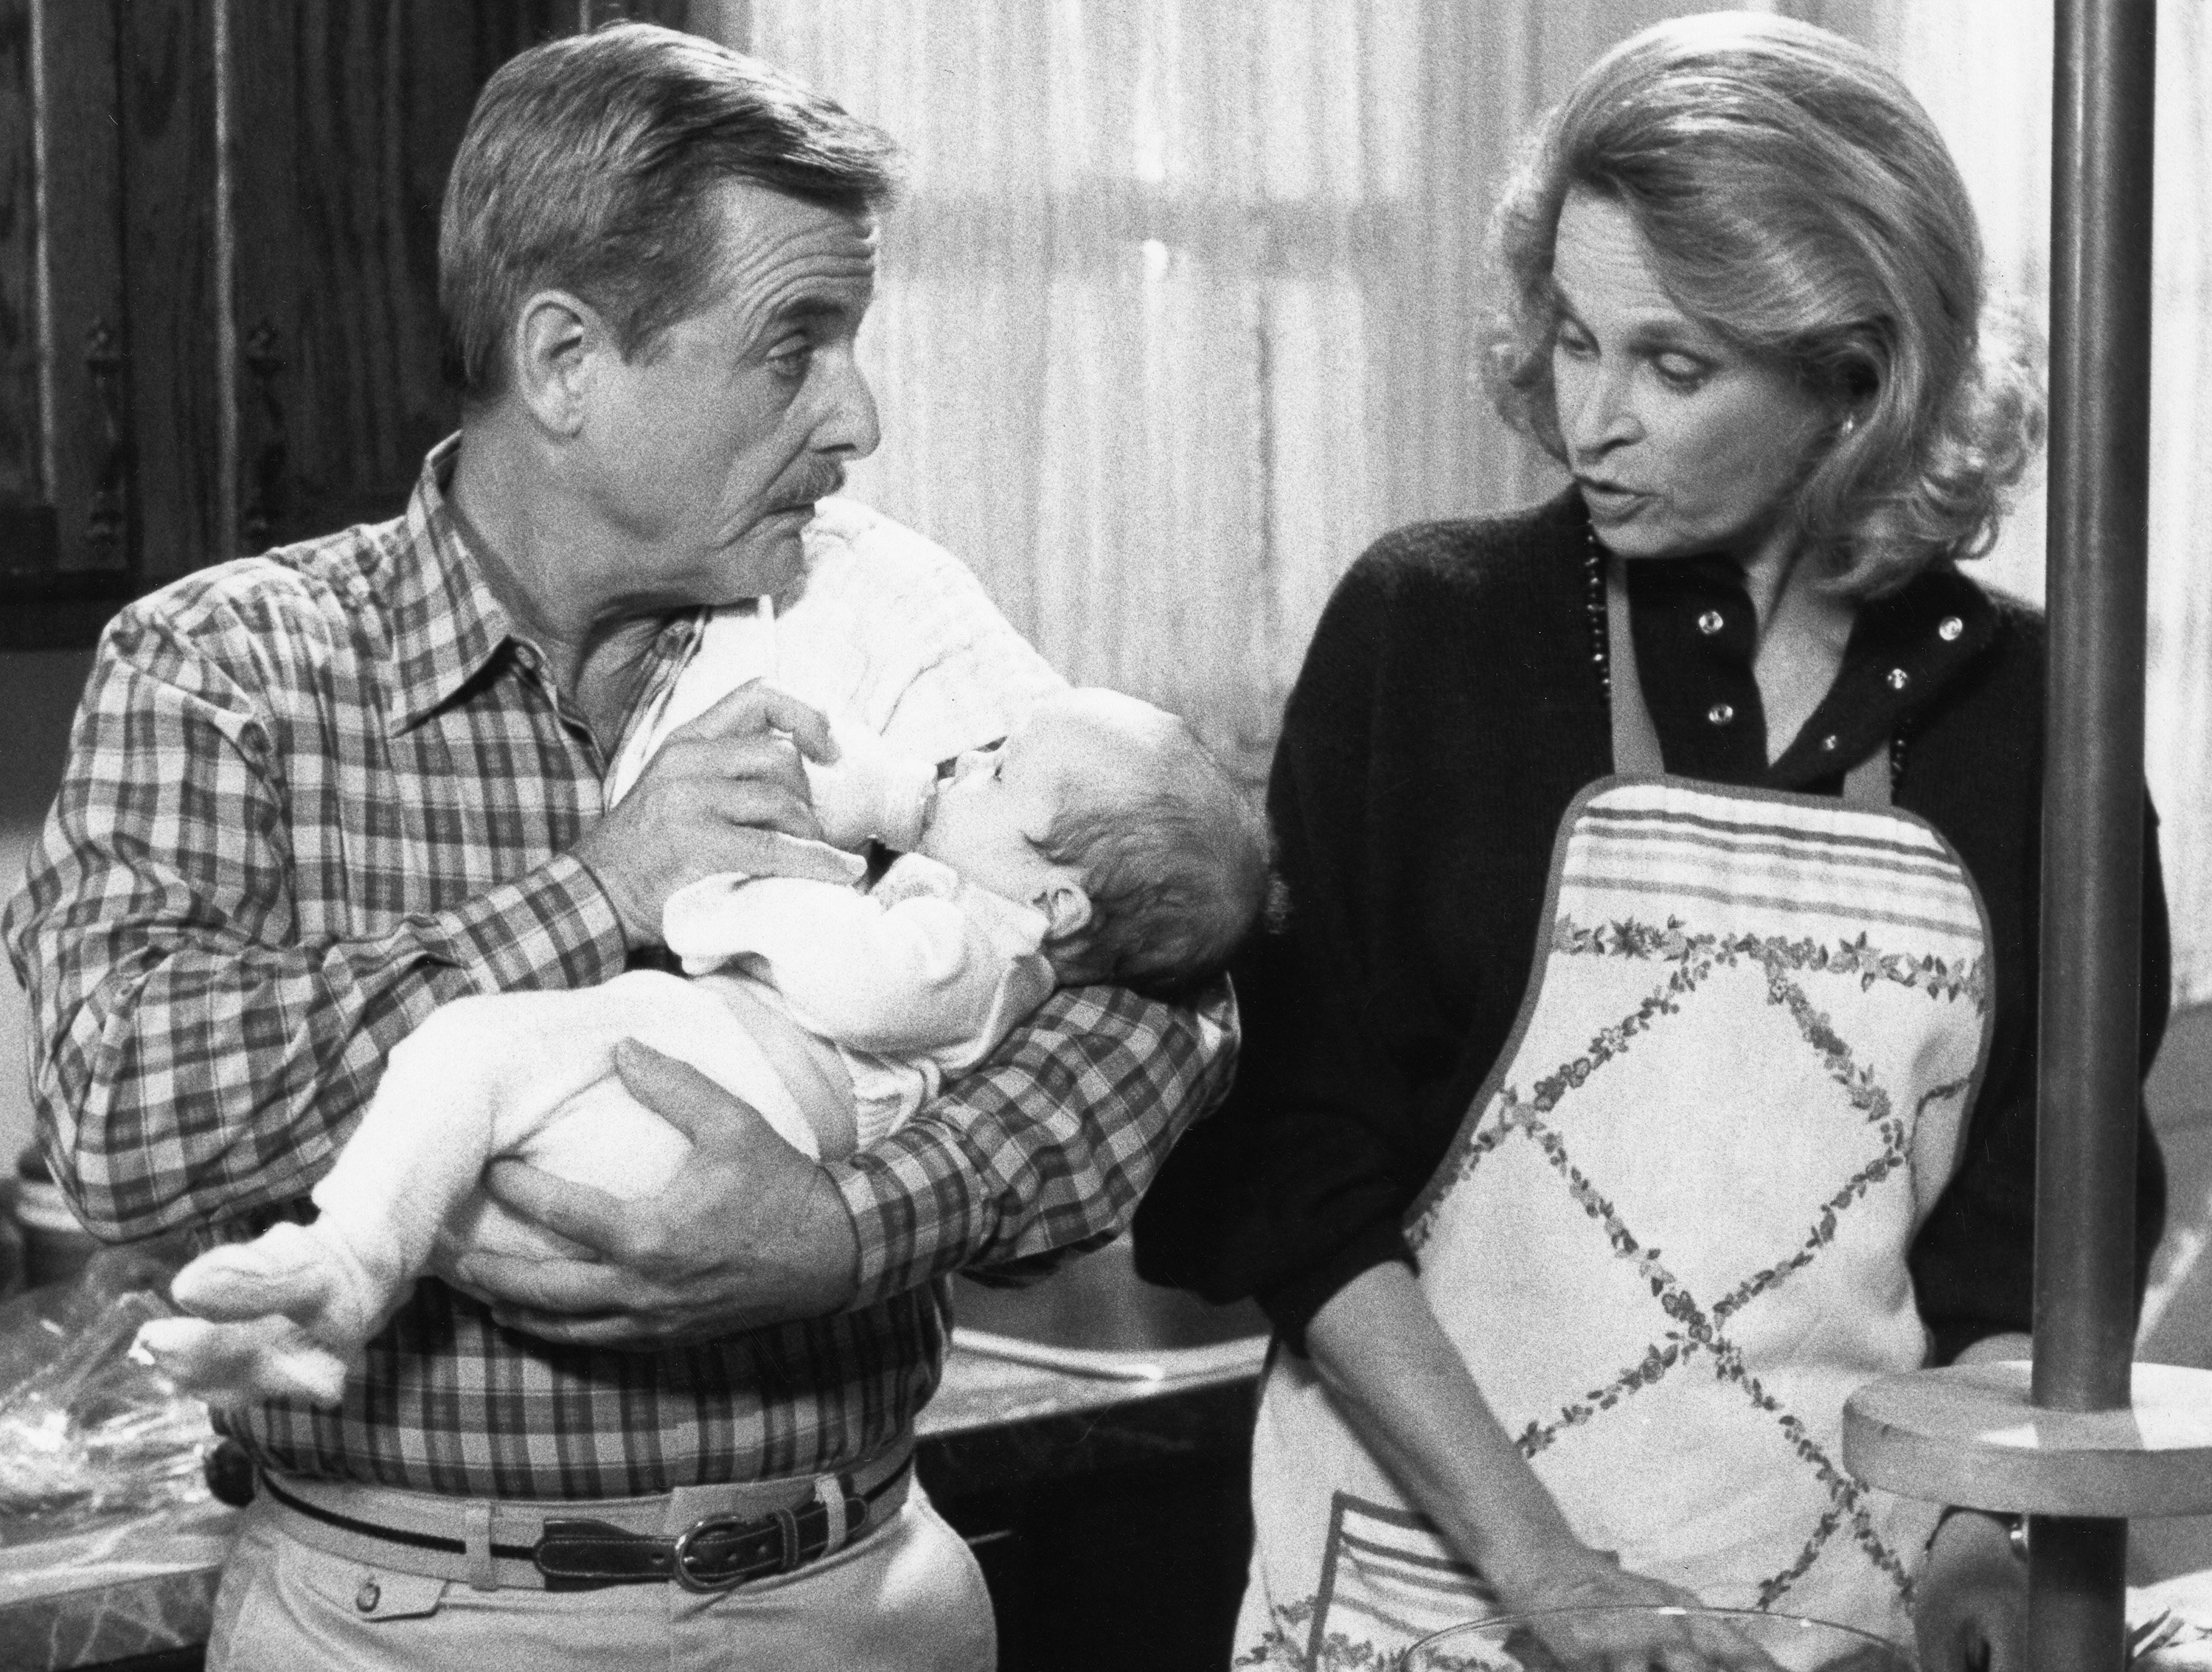 William Daniels as Dr. Mark Craig and Bonnie Bartlett as Ellen Craig in "St. Elsewhere" on November 27, 1985 | Source: Getty Images